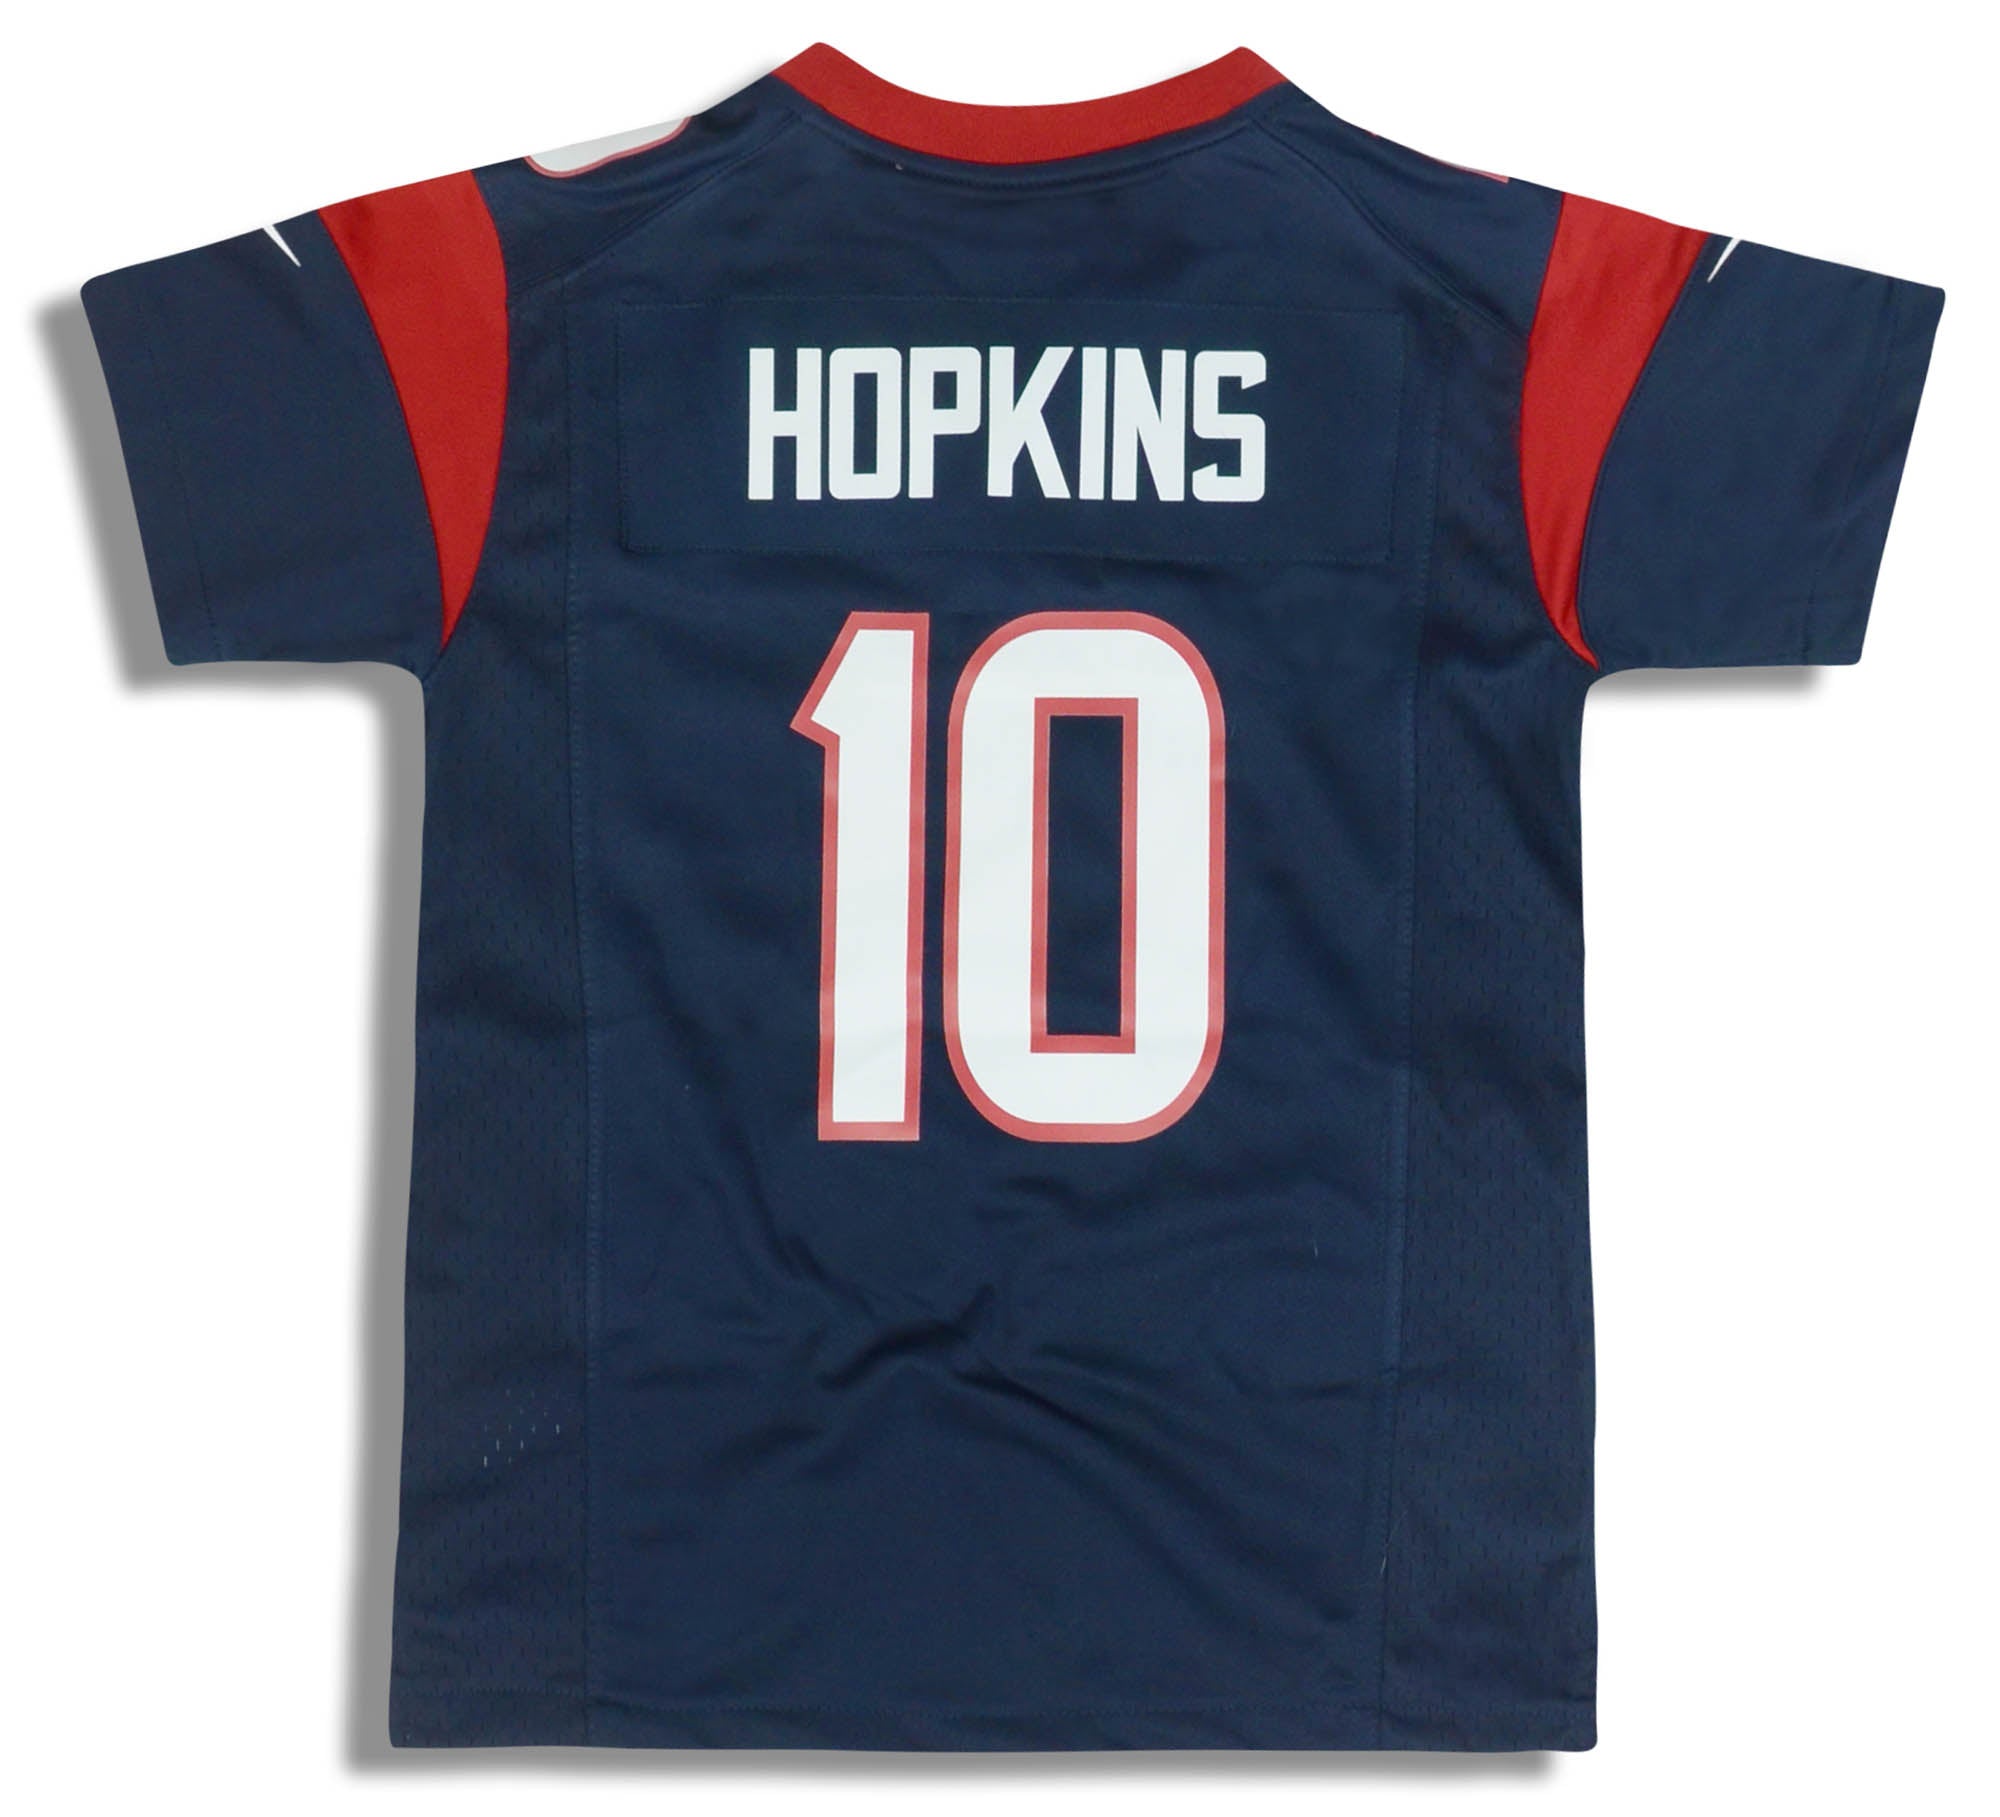 2018 HOUSTON TEXANS HOPKINS #10 NIKE GAME JERSEY (HOME) Y - W/TAGS